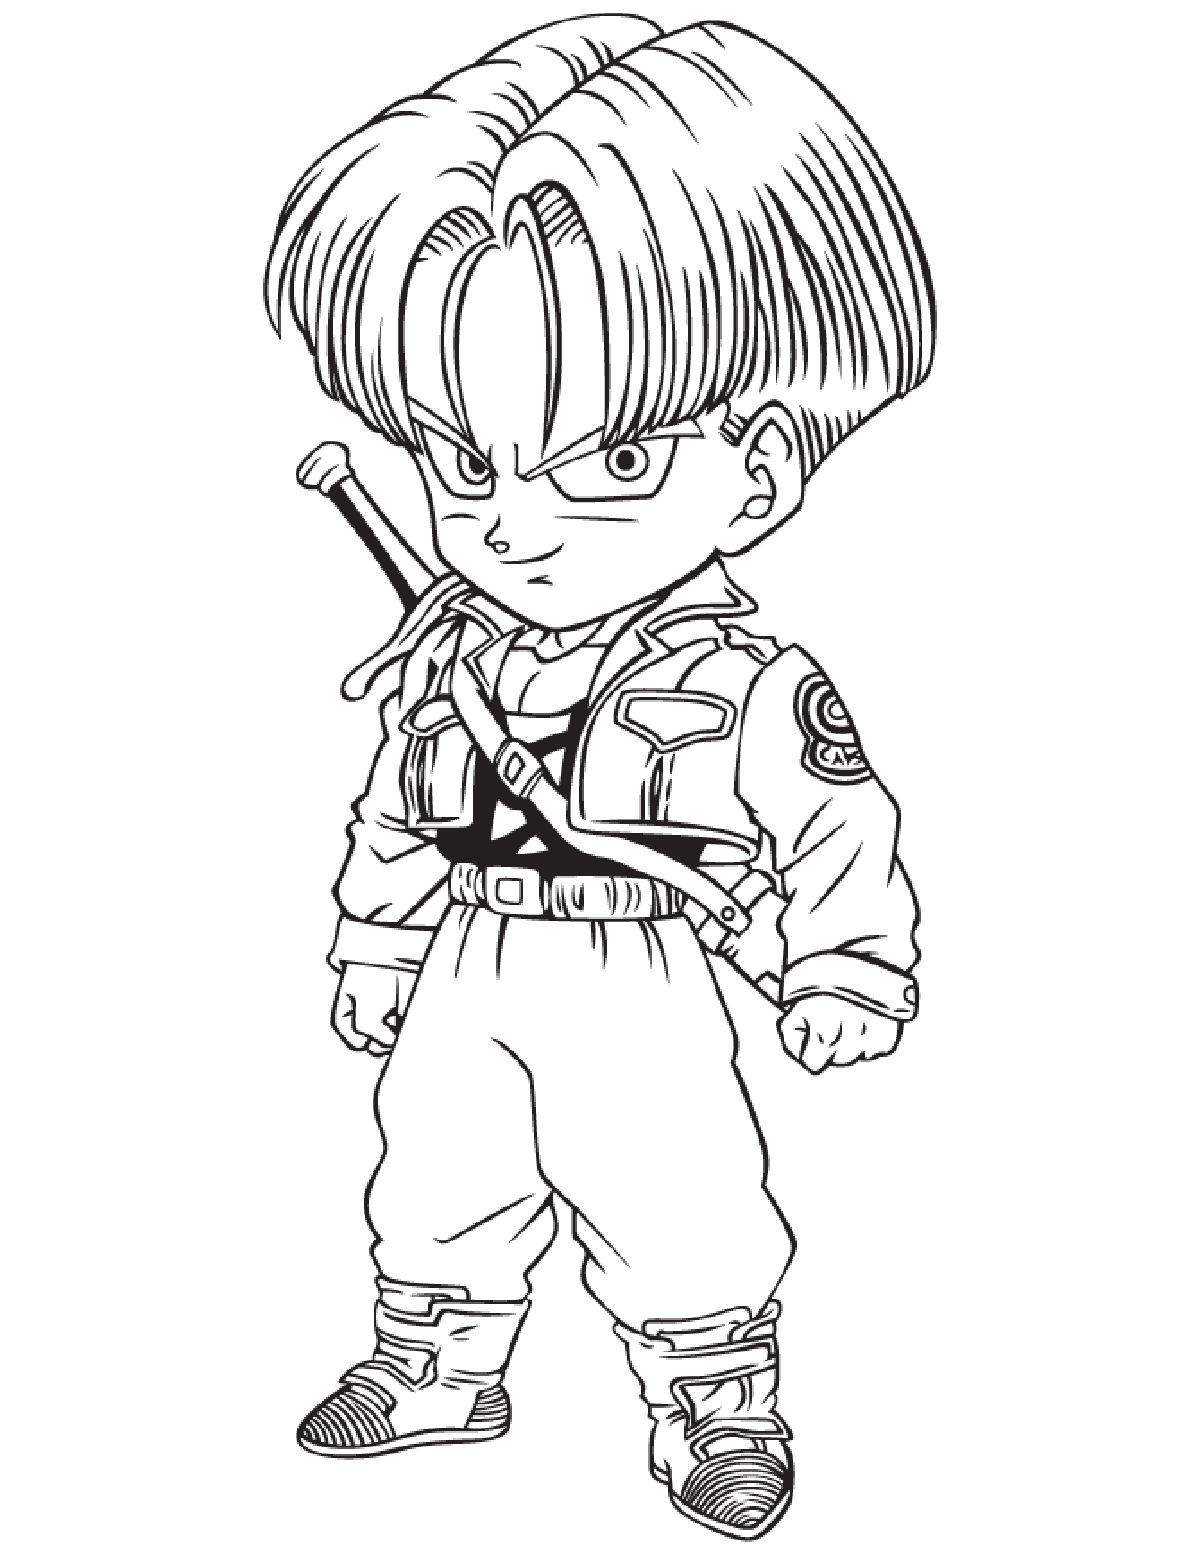 ttrunks kid  dragon ball z kids coloring pages